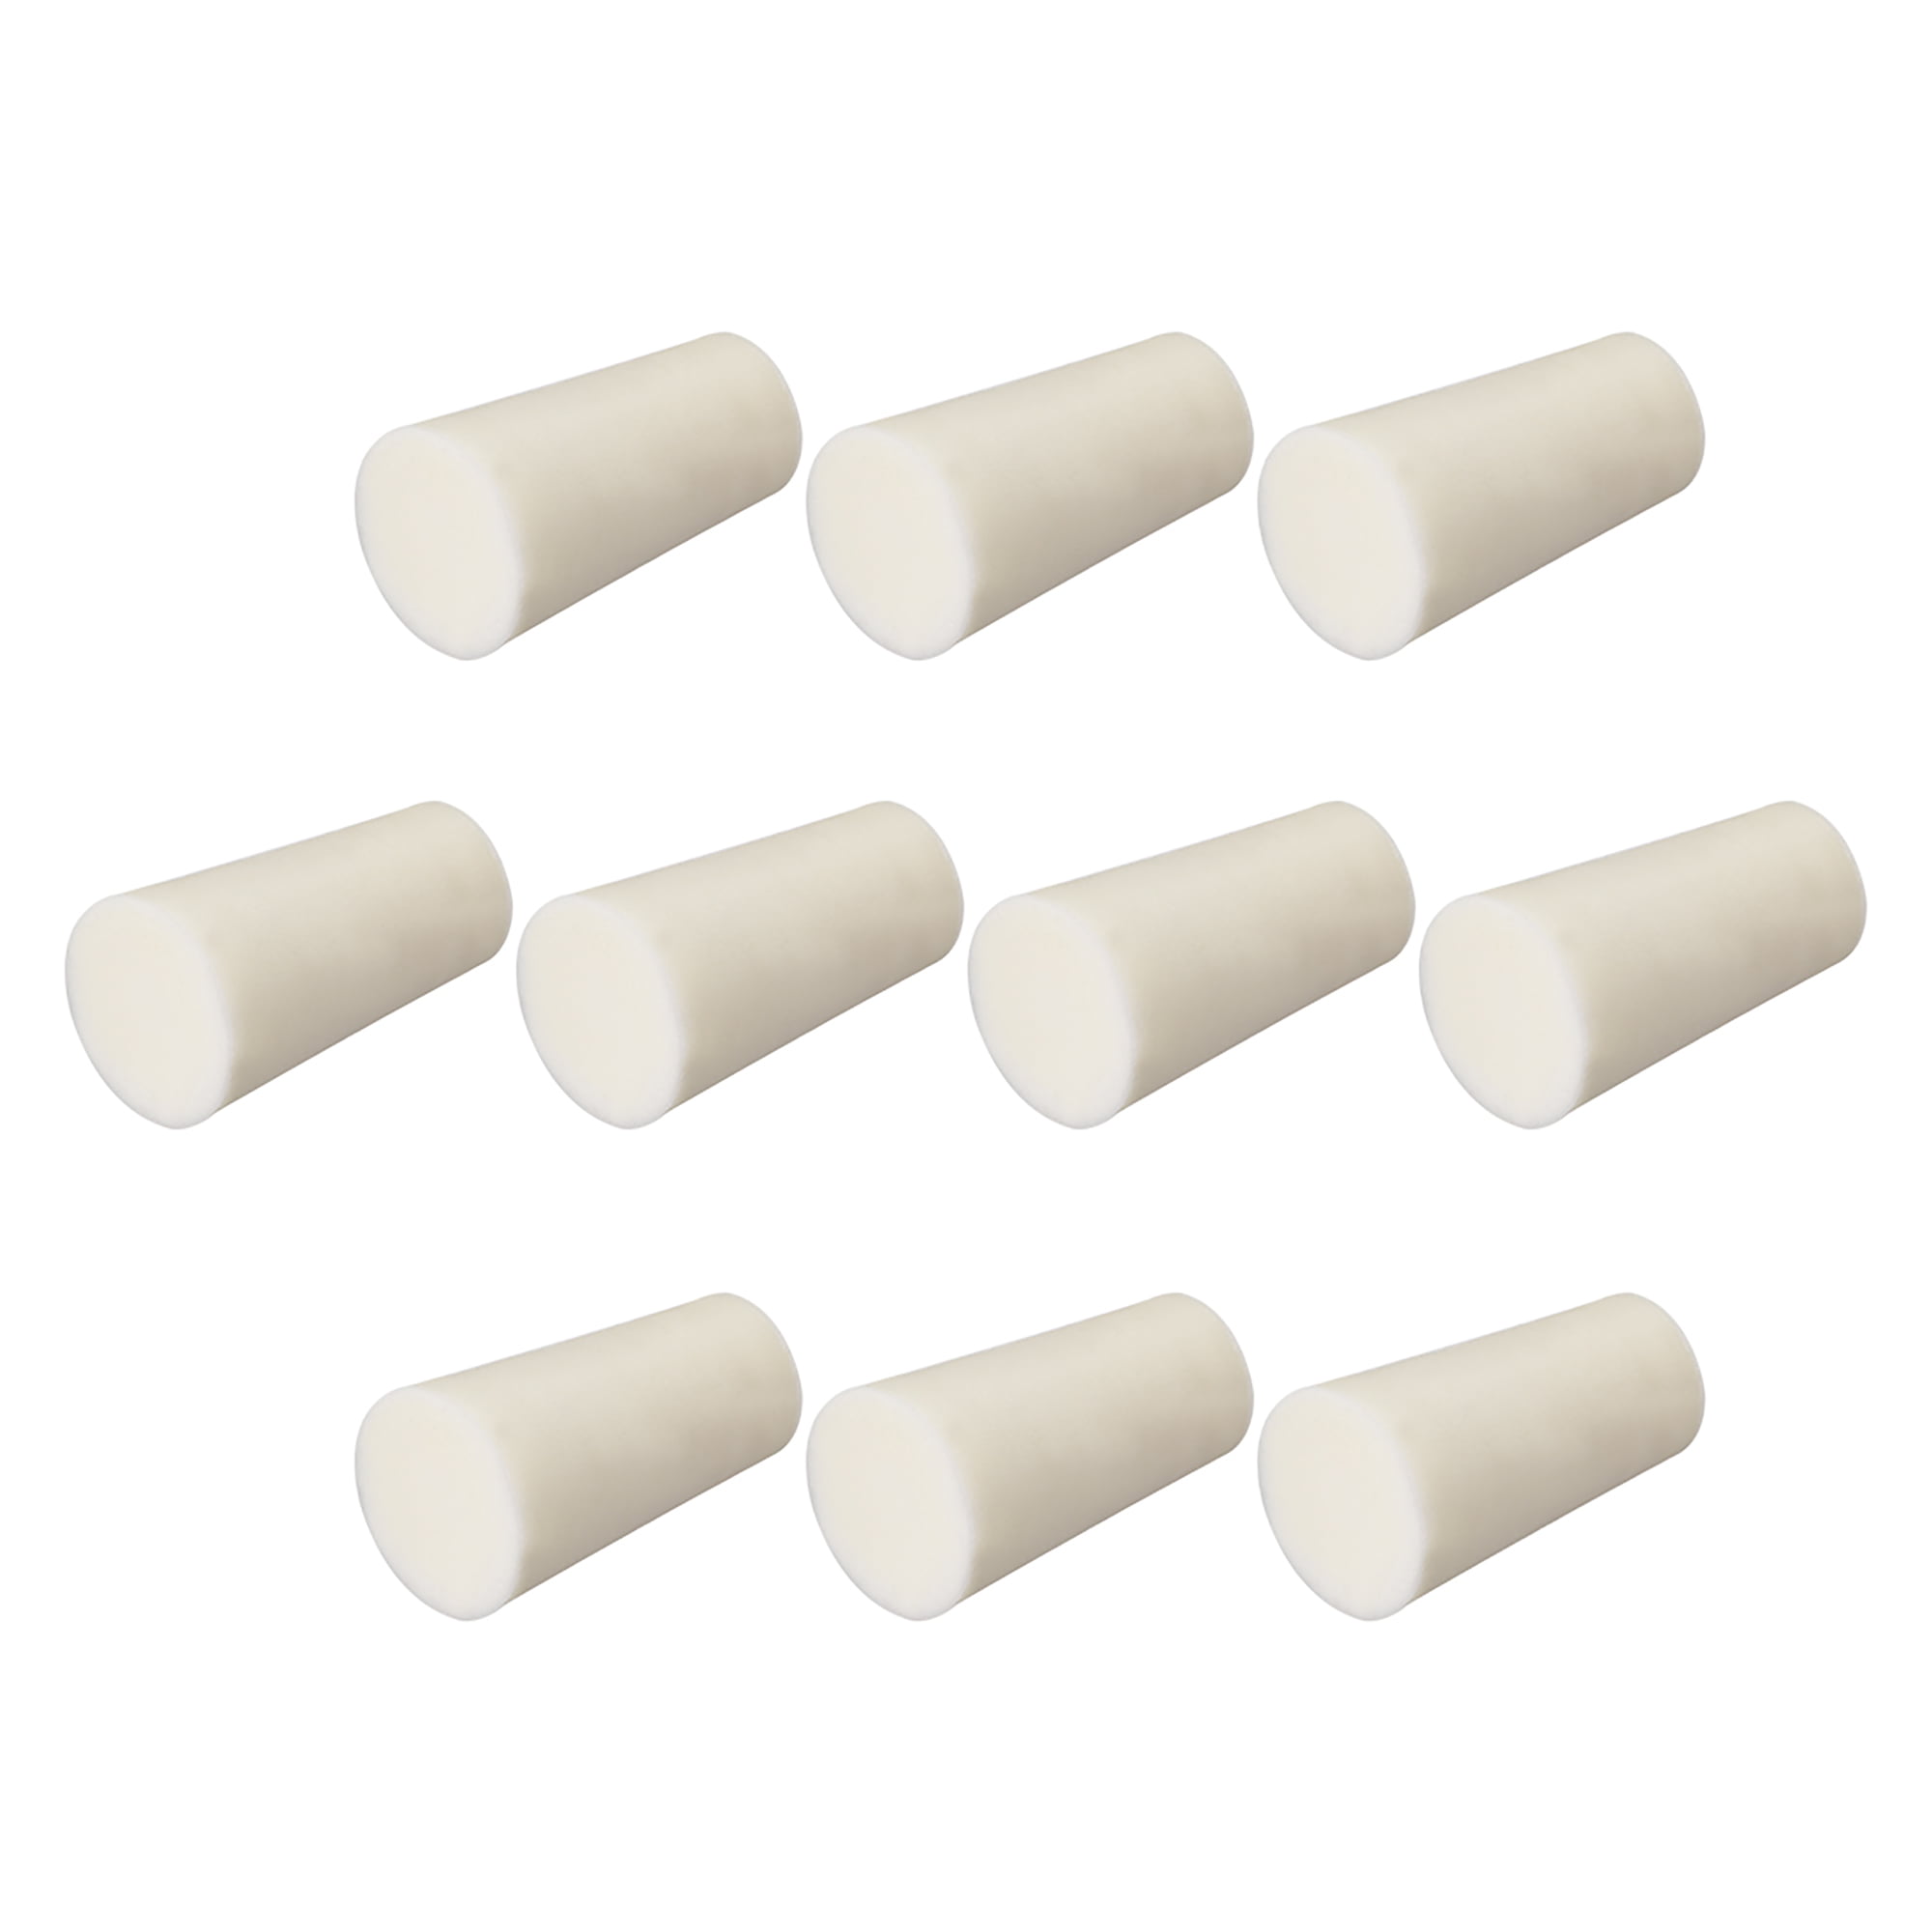 11mm-15mm Beige Drilled Silicone Stopper Plugs for Flask Test Tube ...